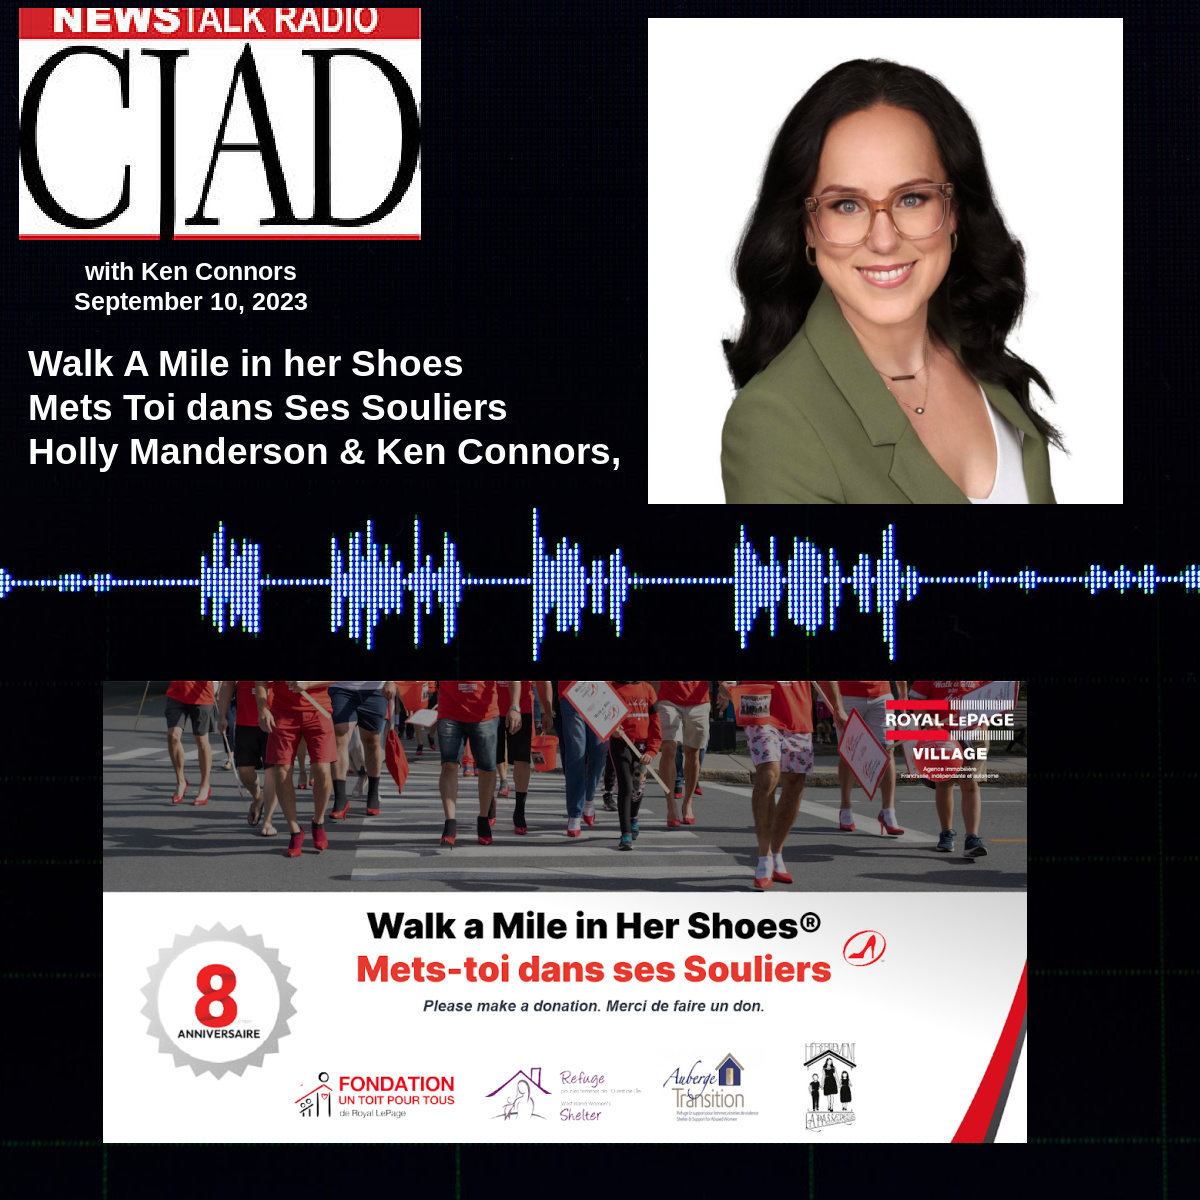 Holly Manderson with CJAD Talk Walk A Mile in her Shoes